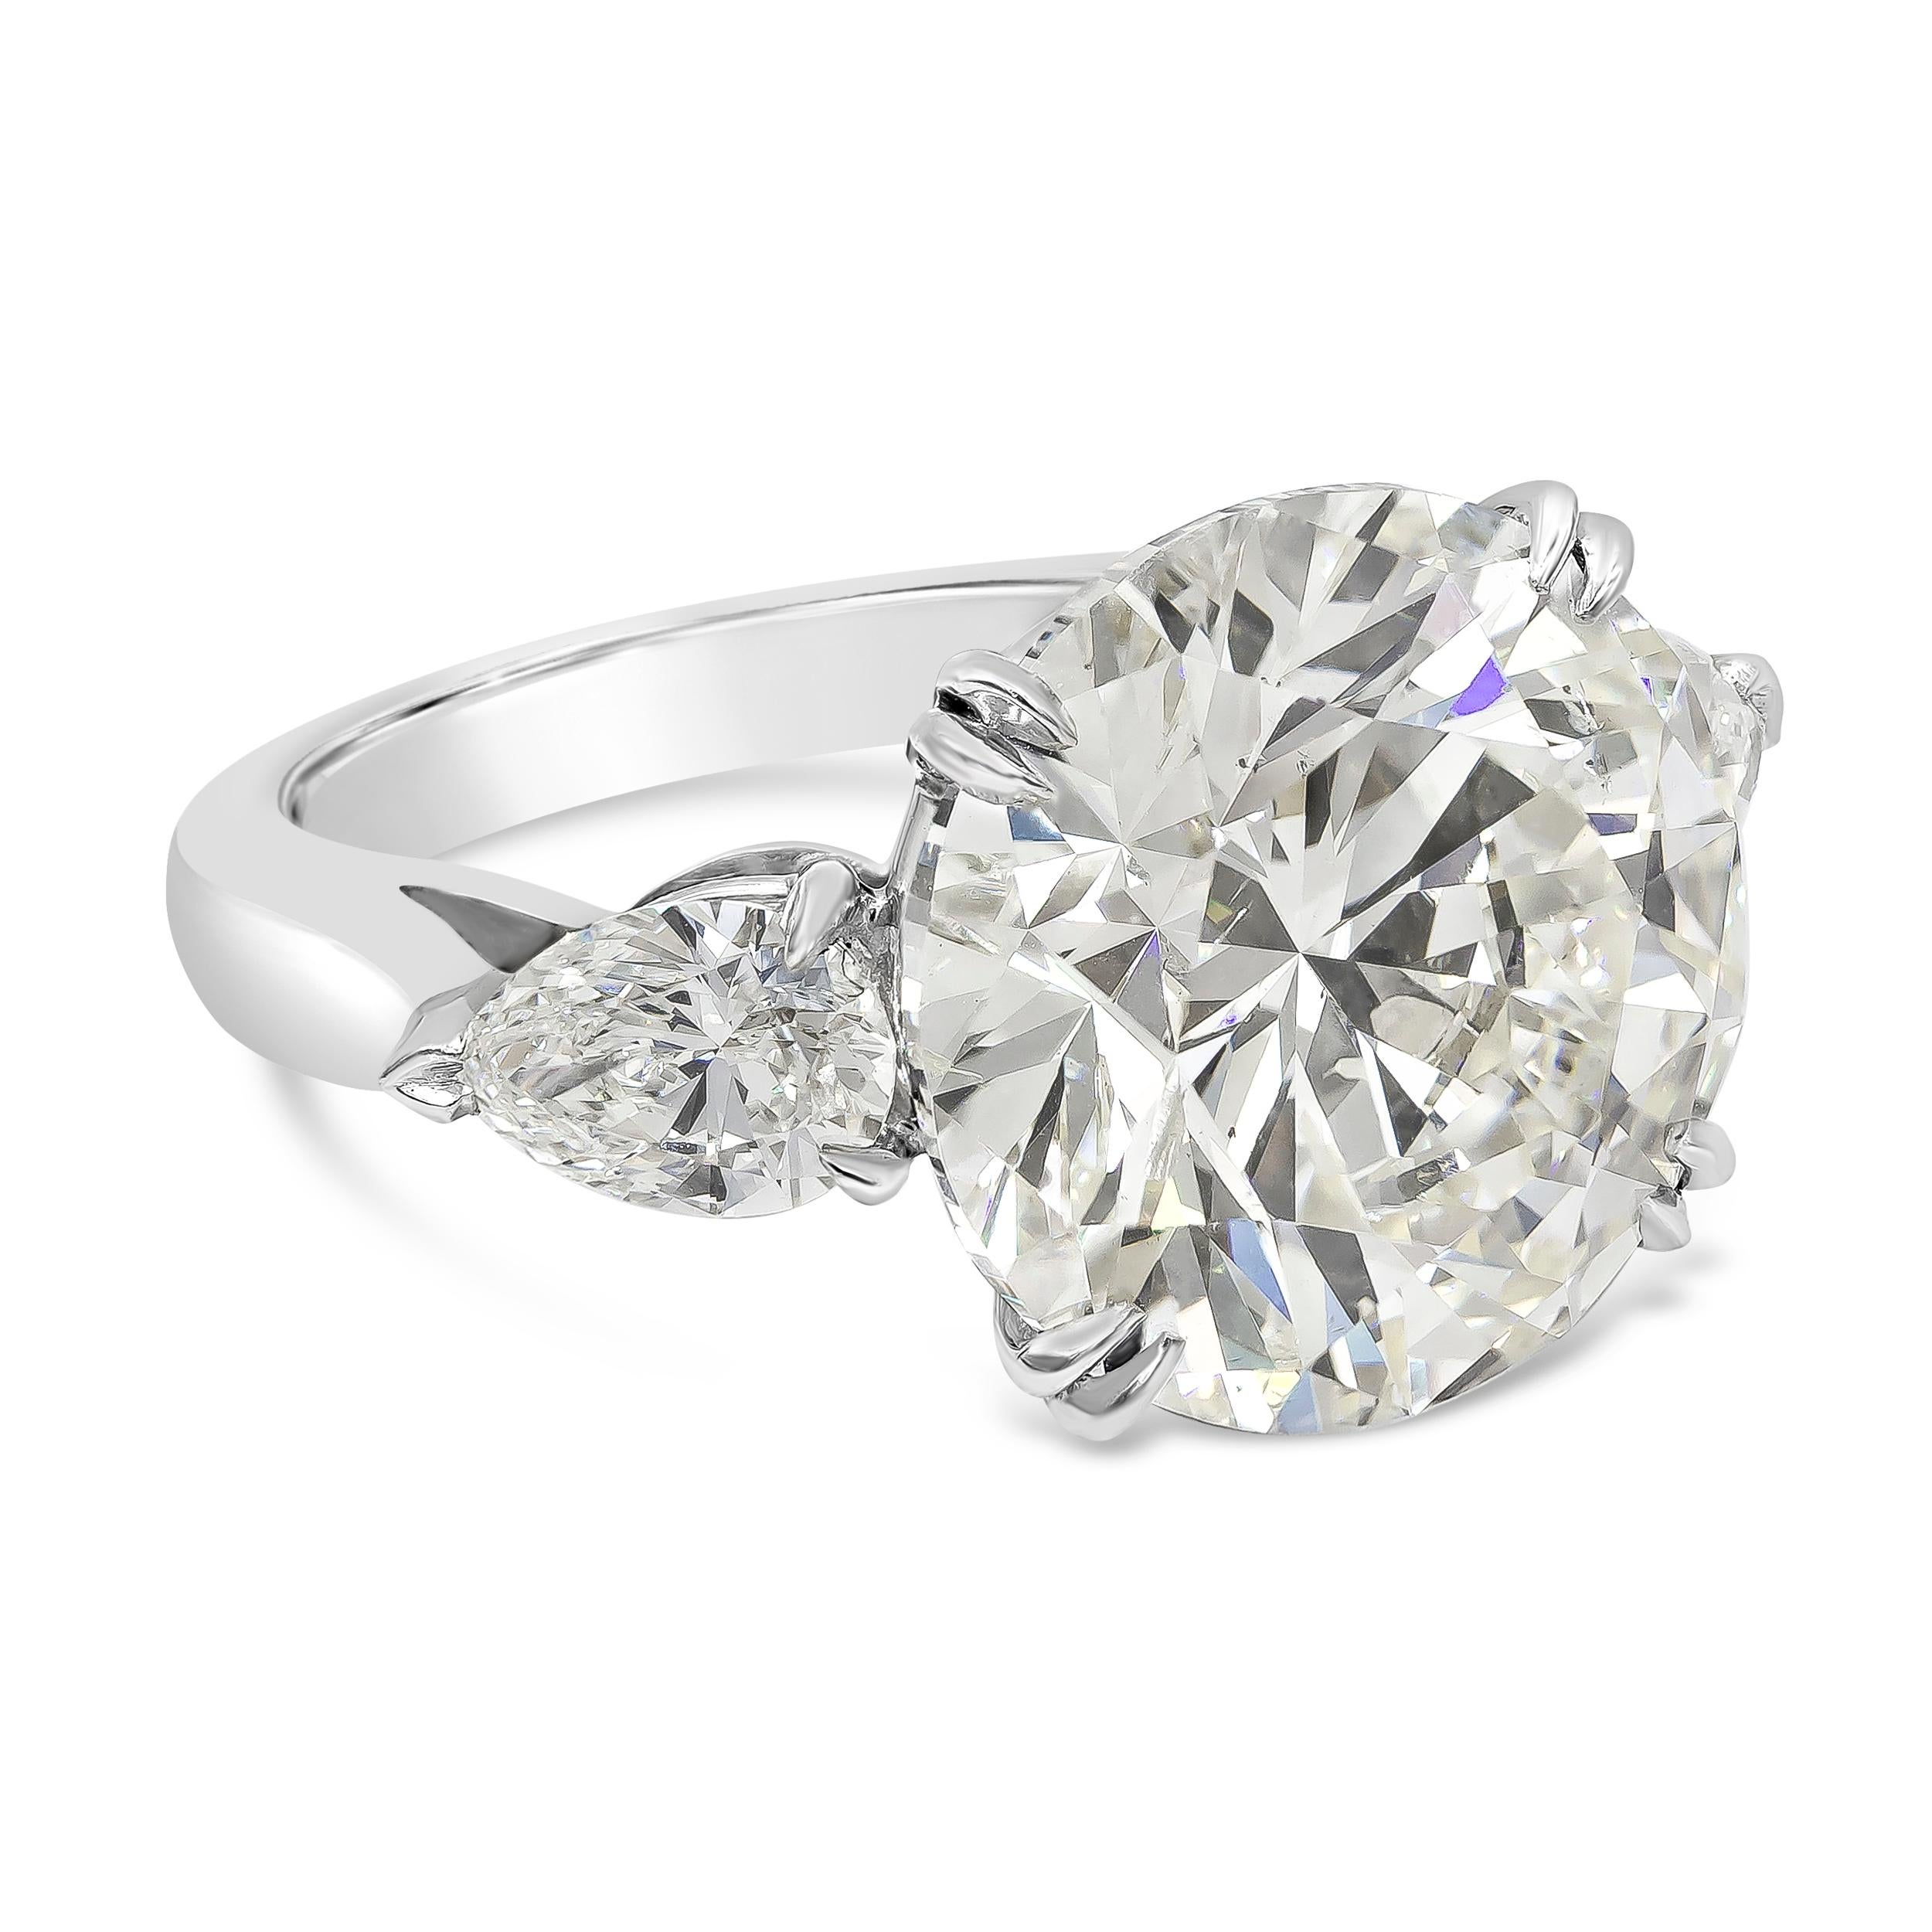 This gorgeous and important engagement ring features a 10.09 carat brilliant round shape diamond that is GIA Certified as K color and SI2 in clarity, flanked by pear shape diamonds on each side weighing 1.22 carats total. Finely made in platinum.